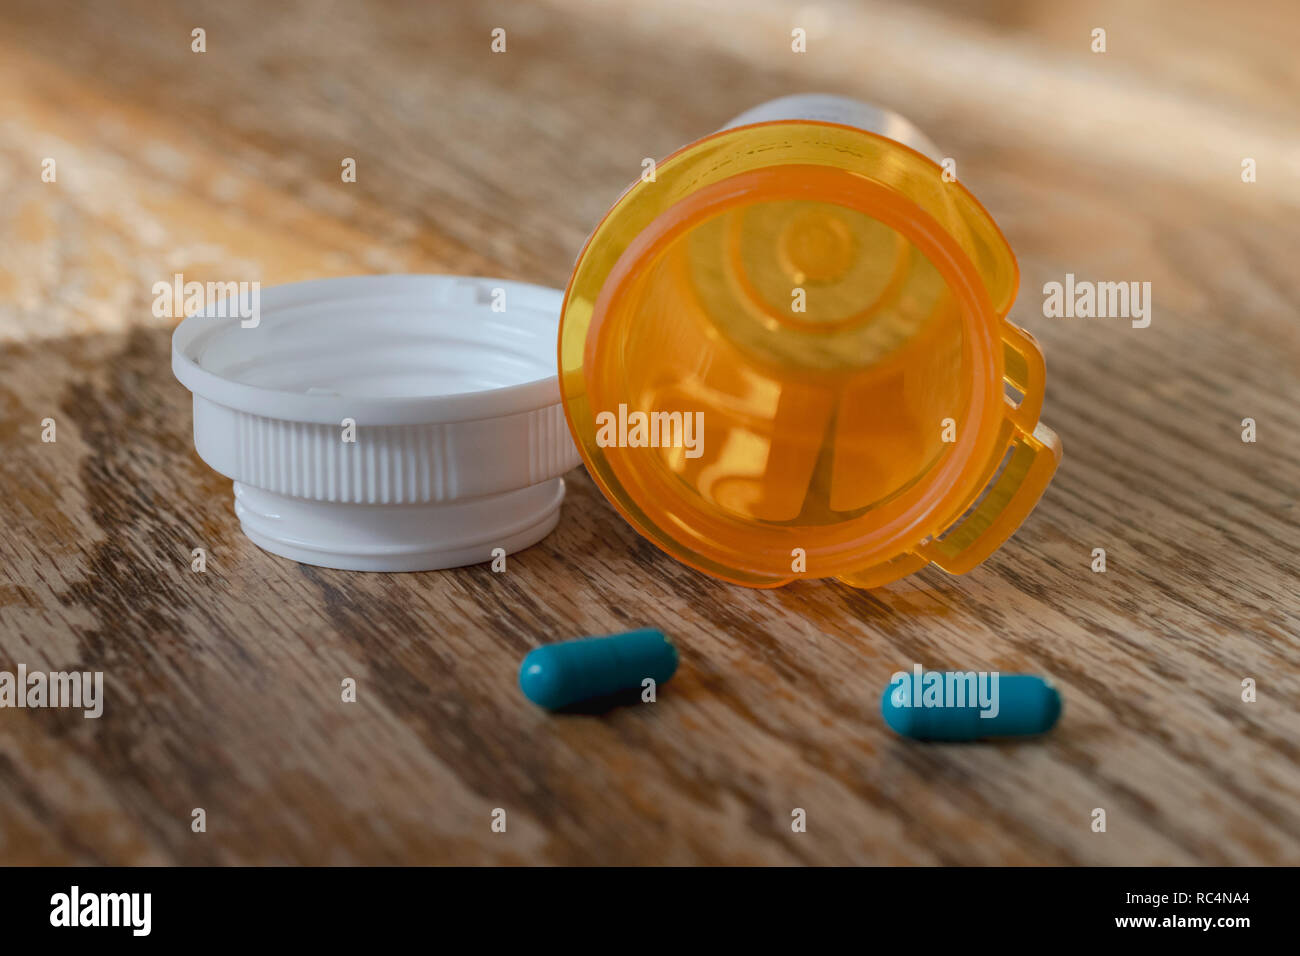 Prescription pill bottle with last two blue pills spilling onto wooden kitchen table.  Close up view. Stock Photo